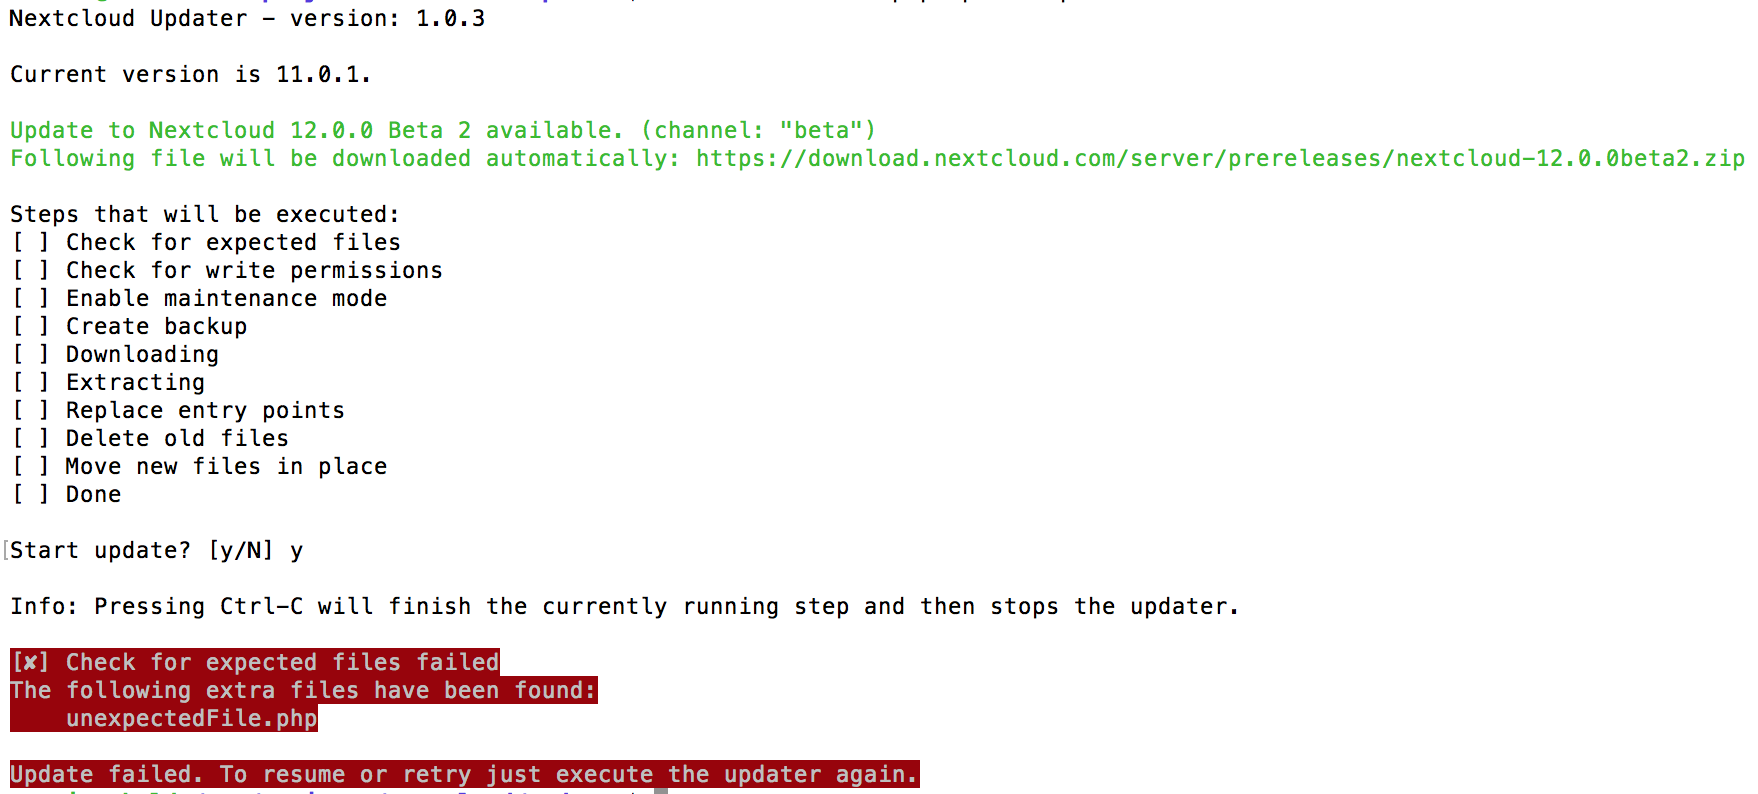 ../_images/updater-cli-4-failed-step.png